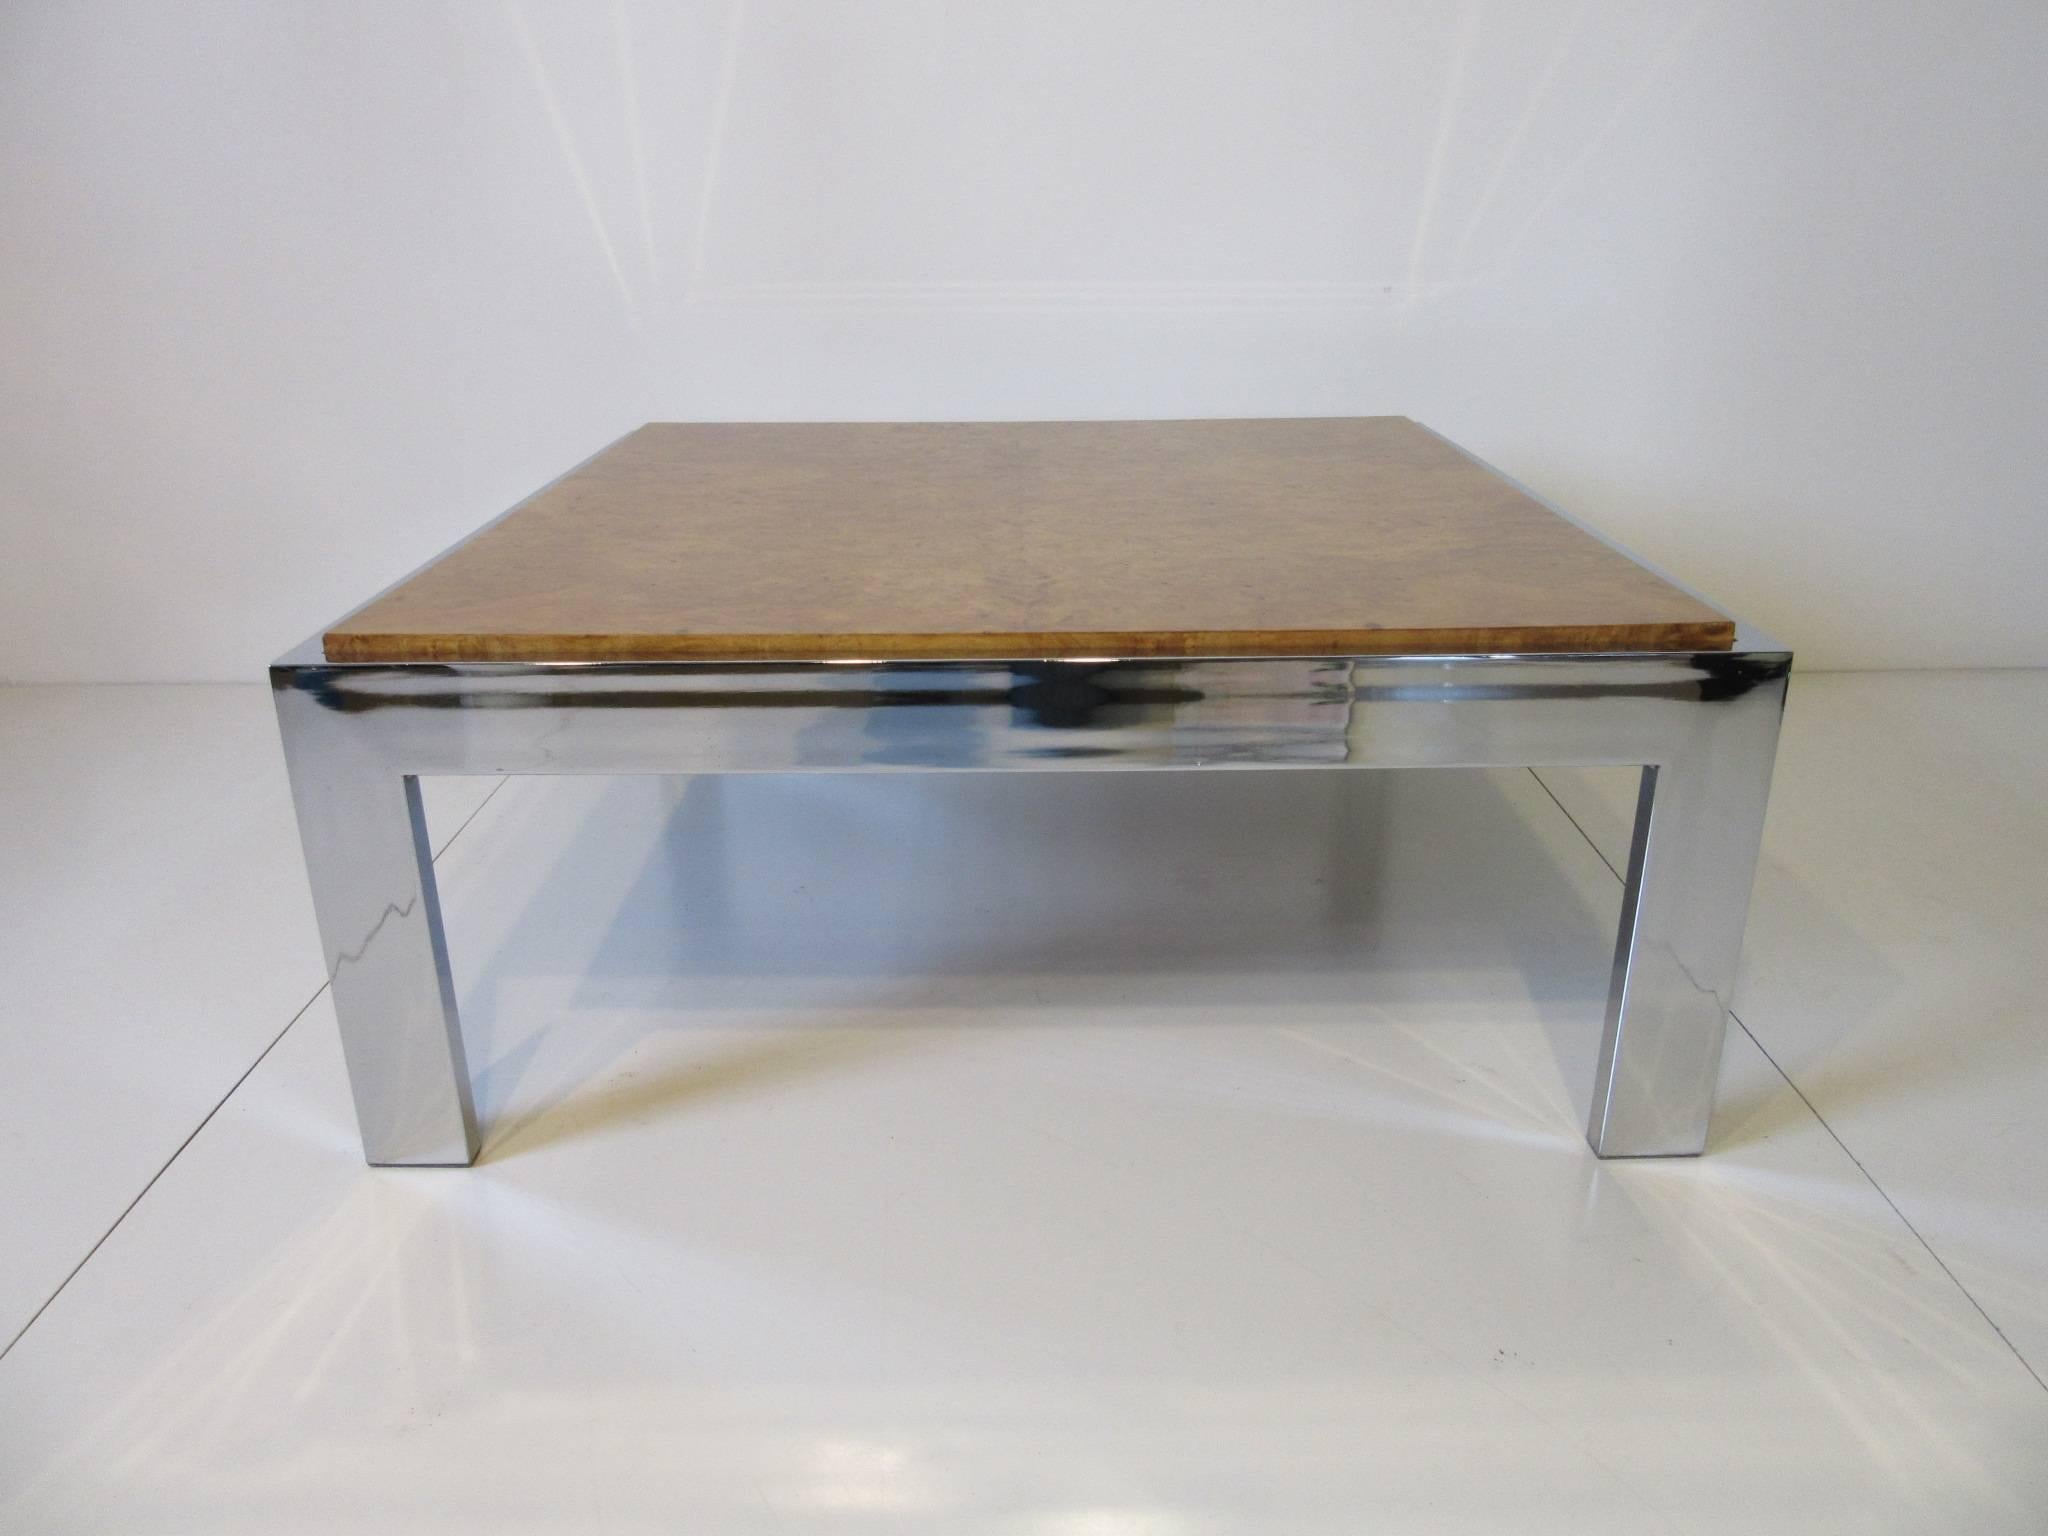 A elegant chrome framed coffee table with raised book matched olive wood burl inset table top, well made and having plastic foot caps to the legs bottoms to prevent hardwood floor scratches.